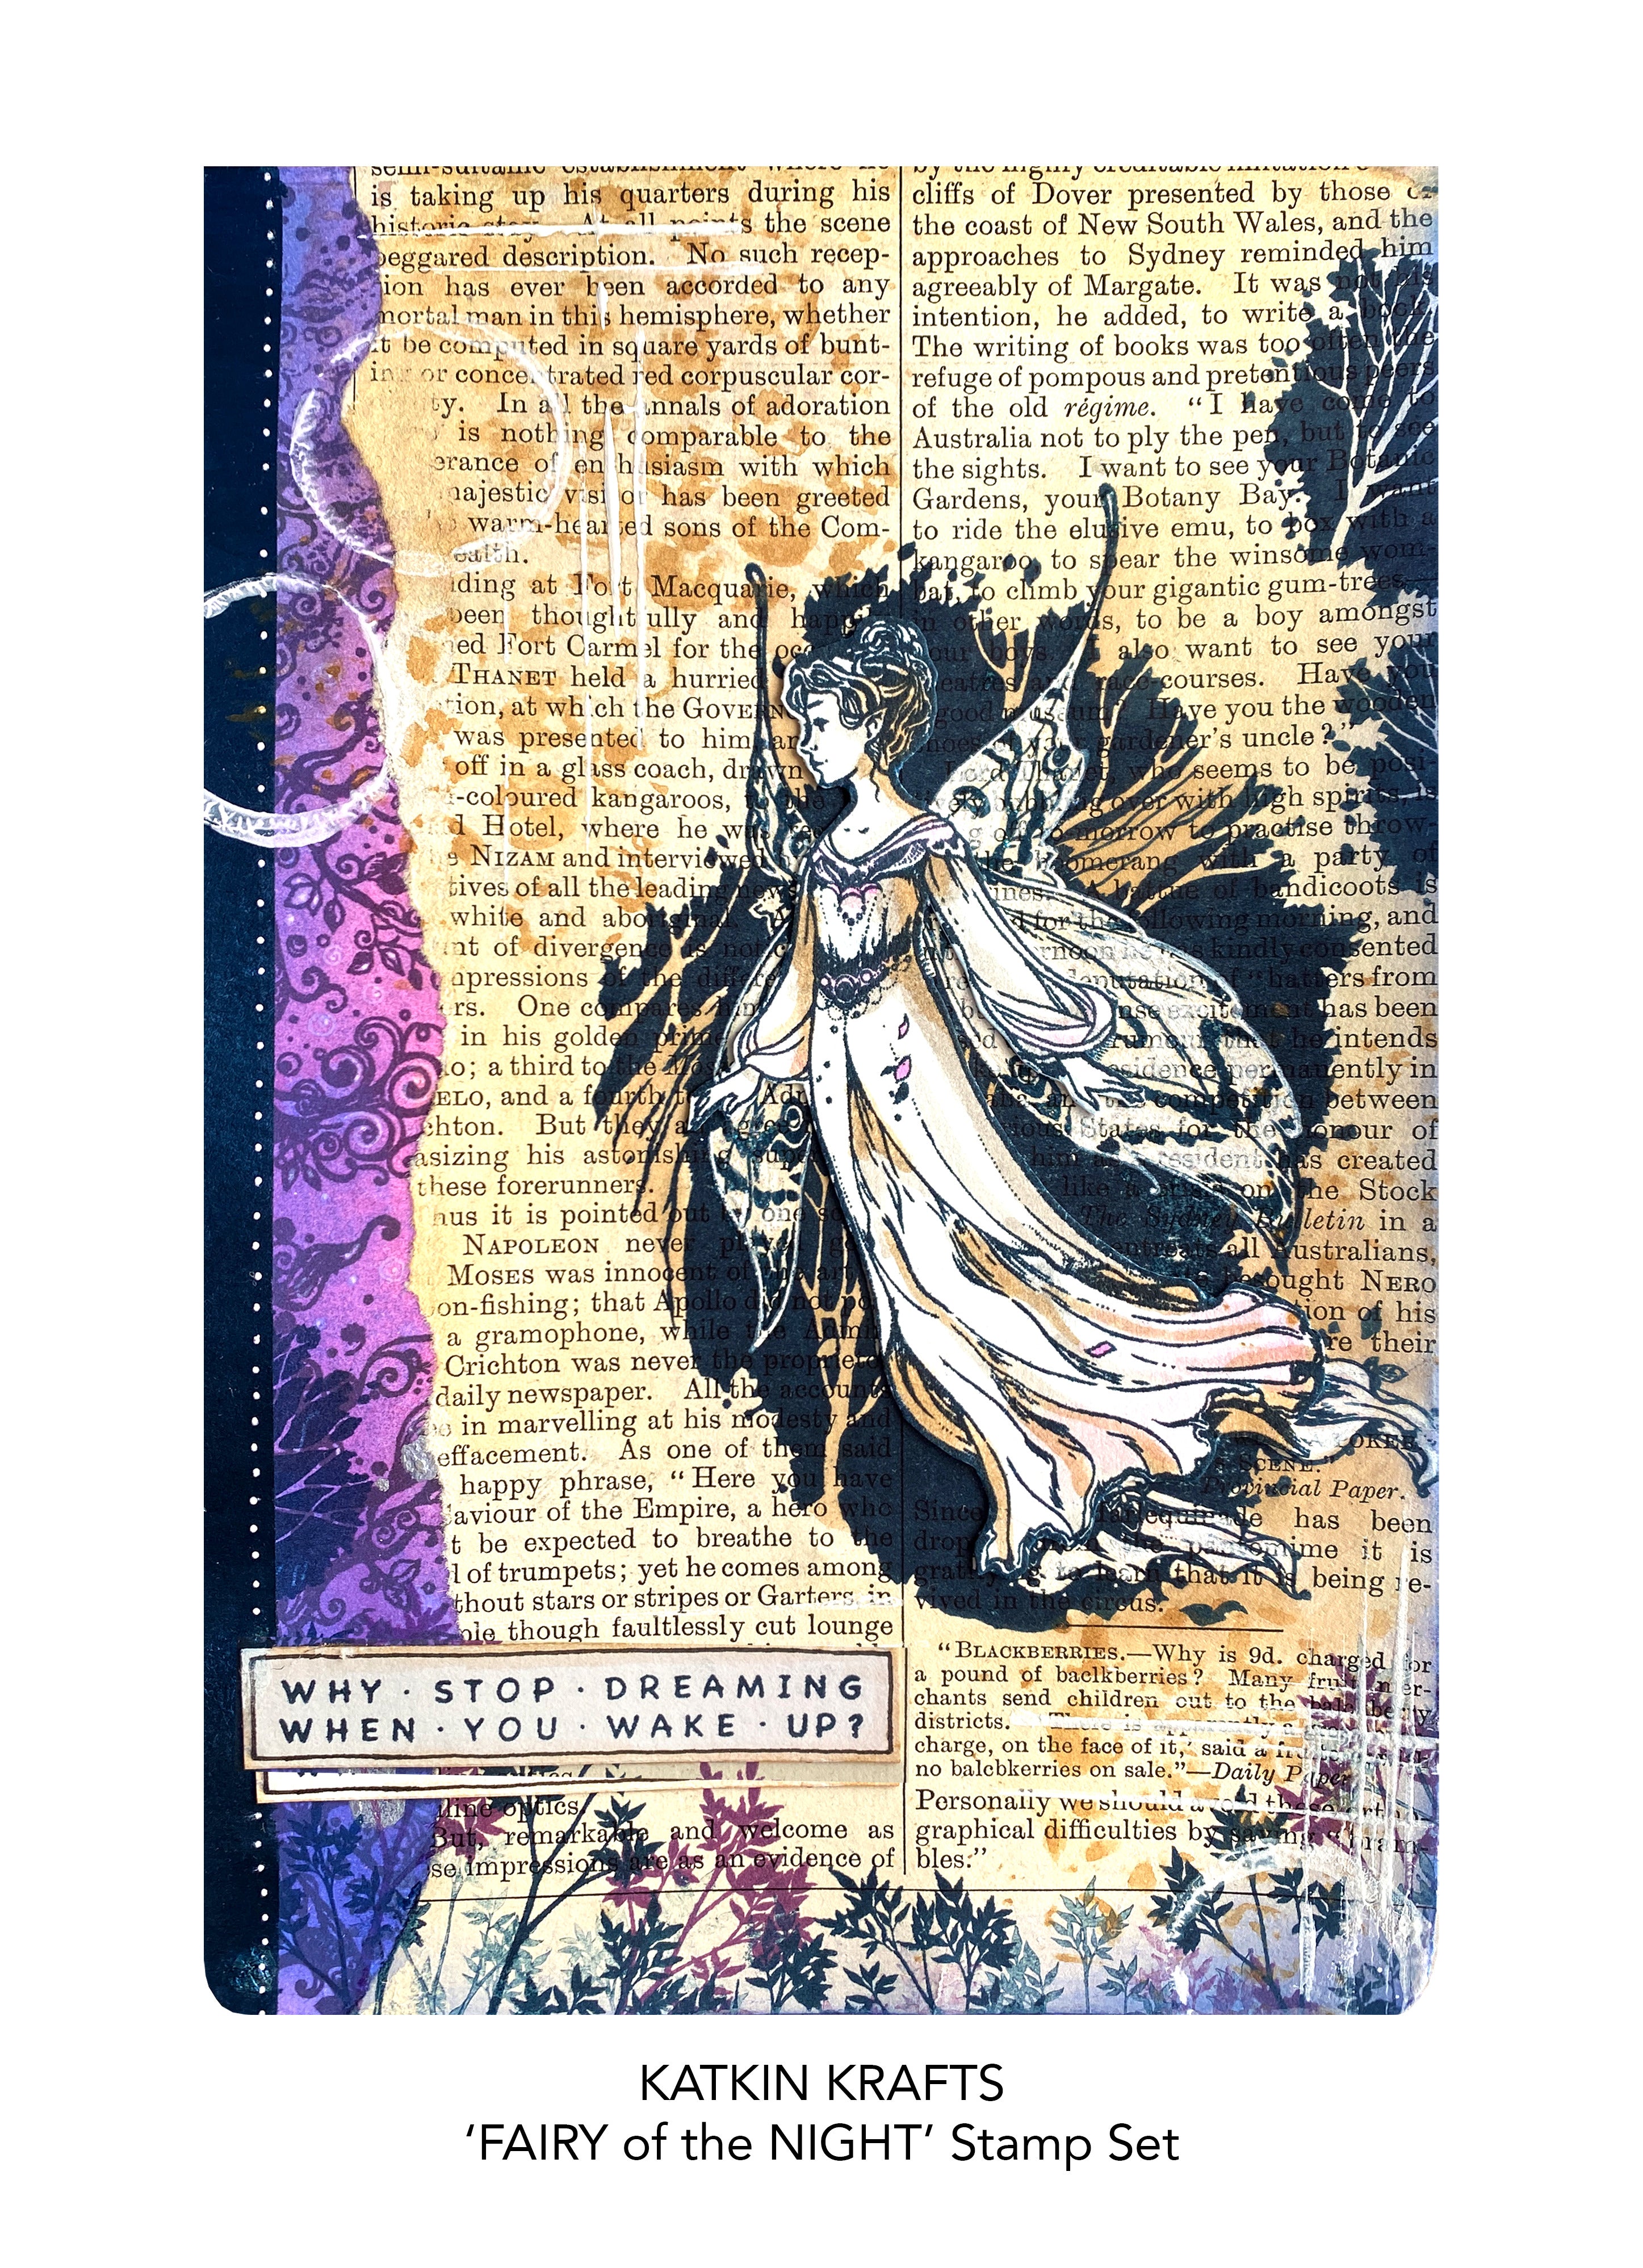 Katkin Krafts Fairy Of the Night 6 in x 8 in Clear Stamp Set